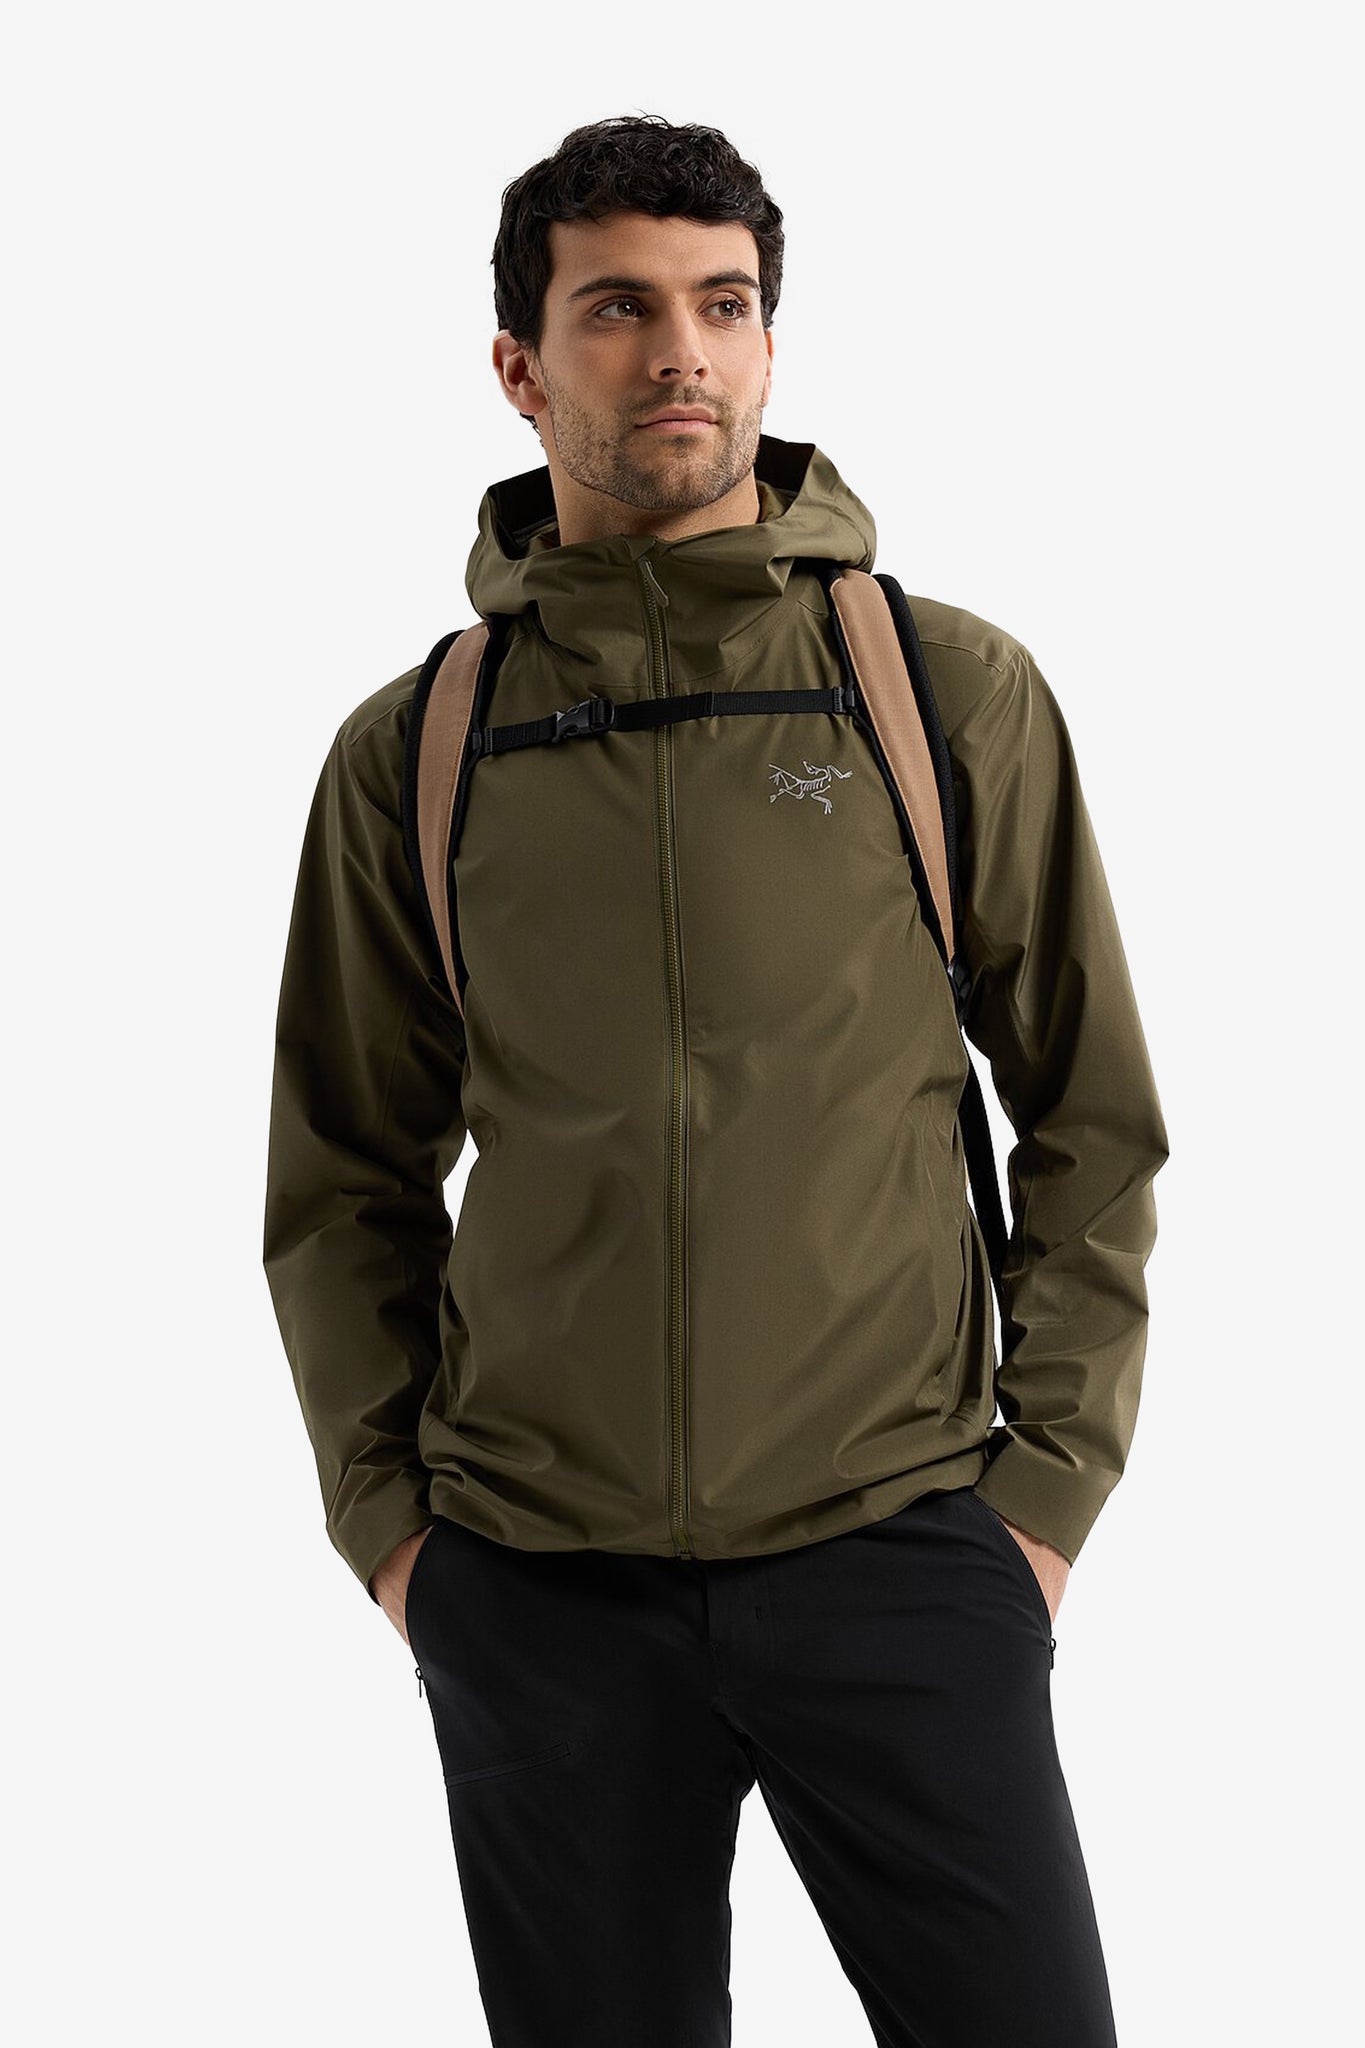 Arc'teryx Unisex Granville 16 Backpack in Canvas